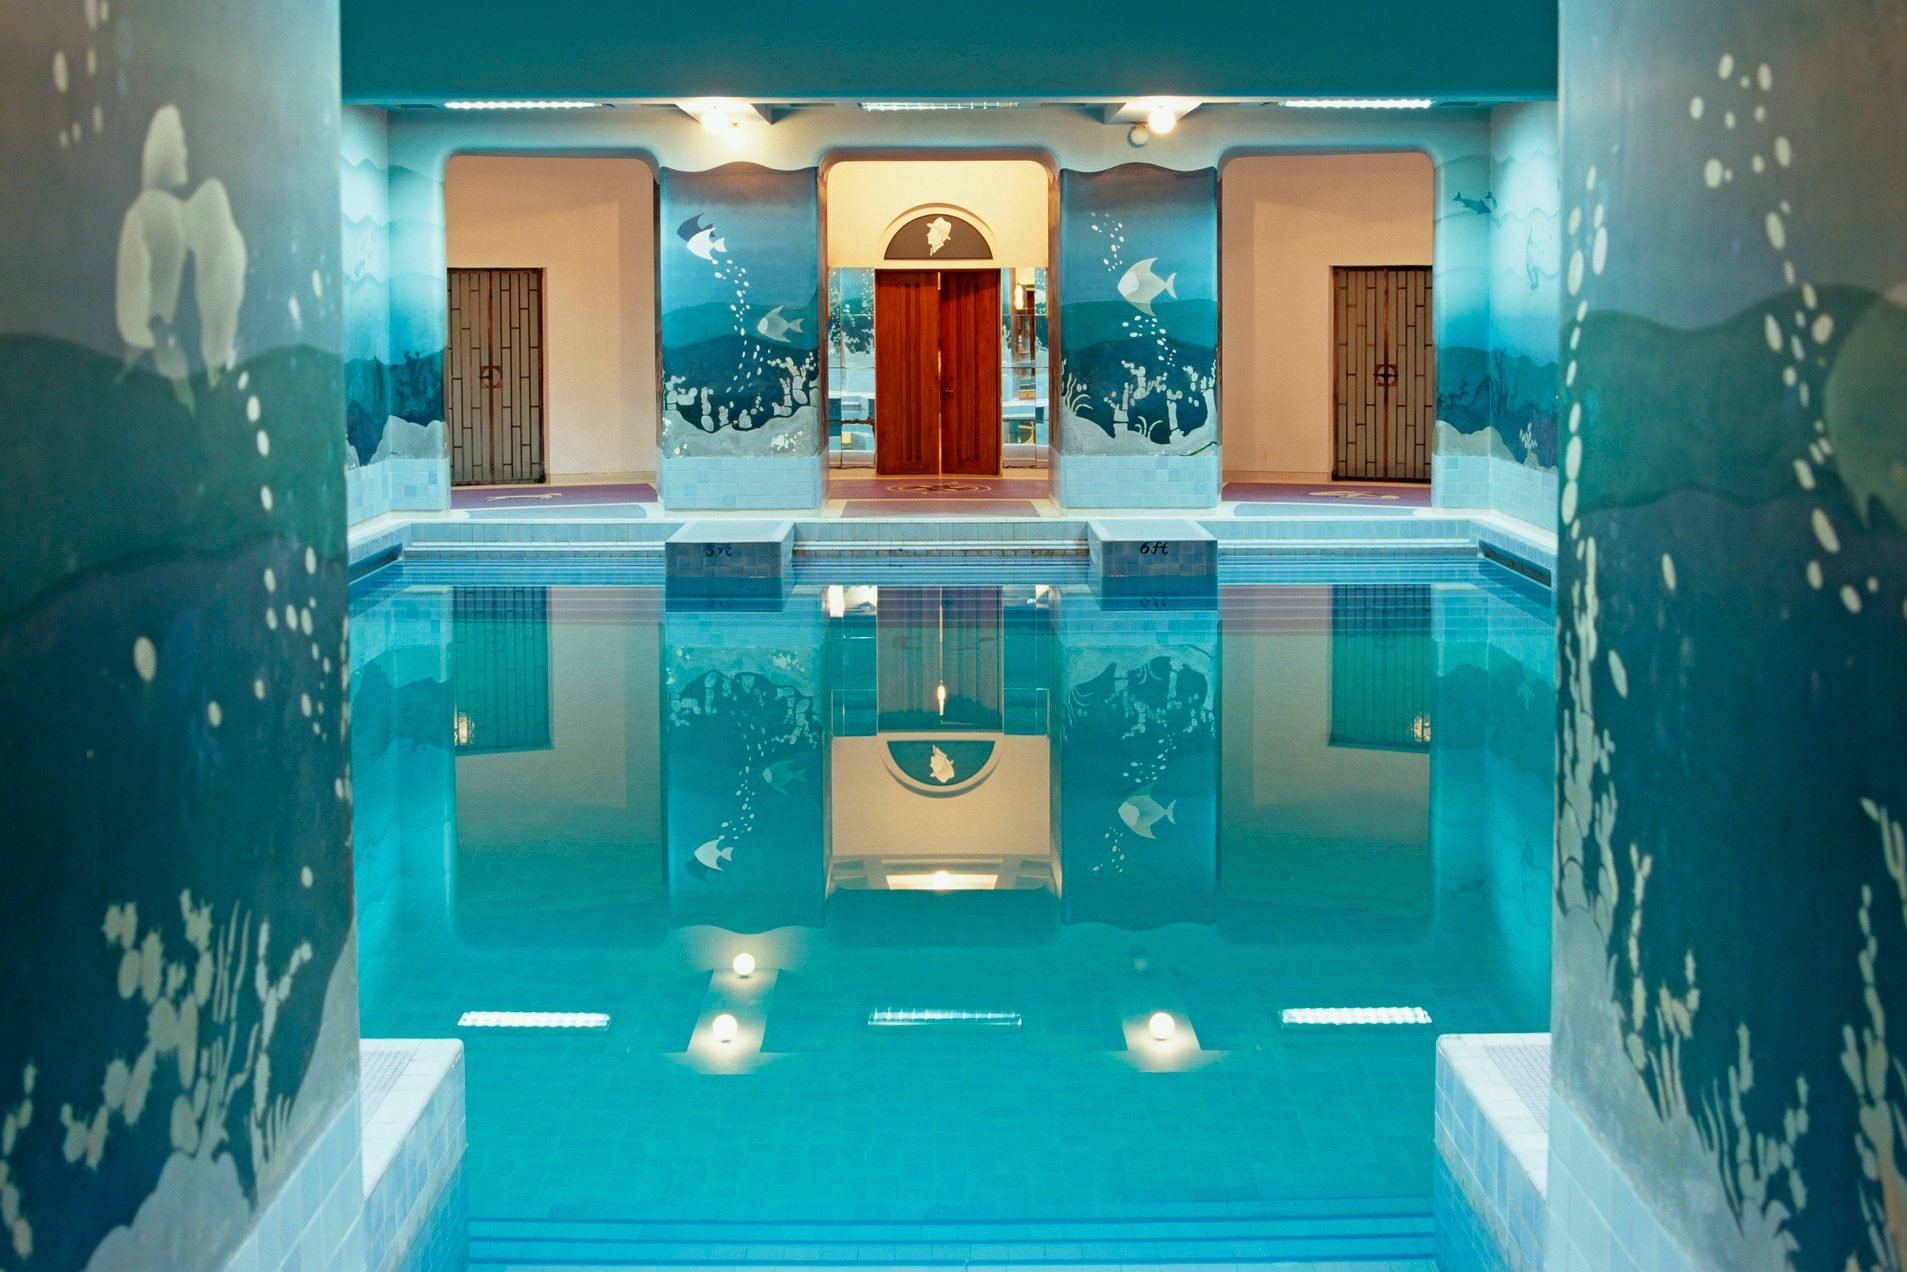 Seascape murals painted on the walls of the indoor swimming pool of Umaid Bhawan Palace